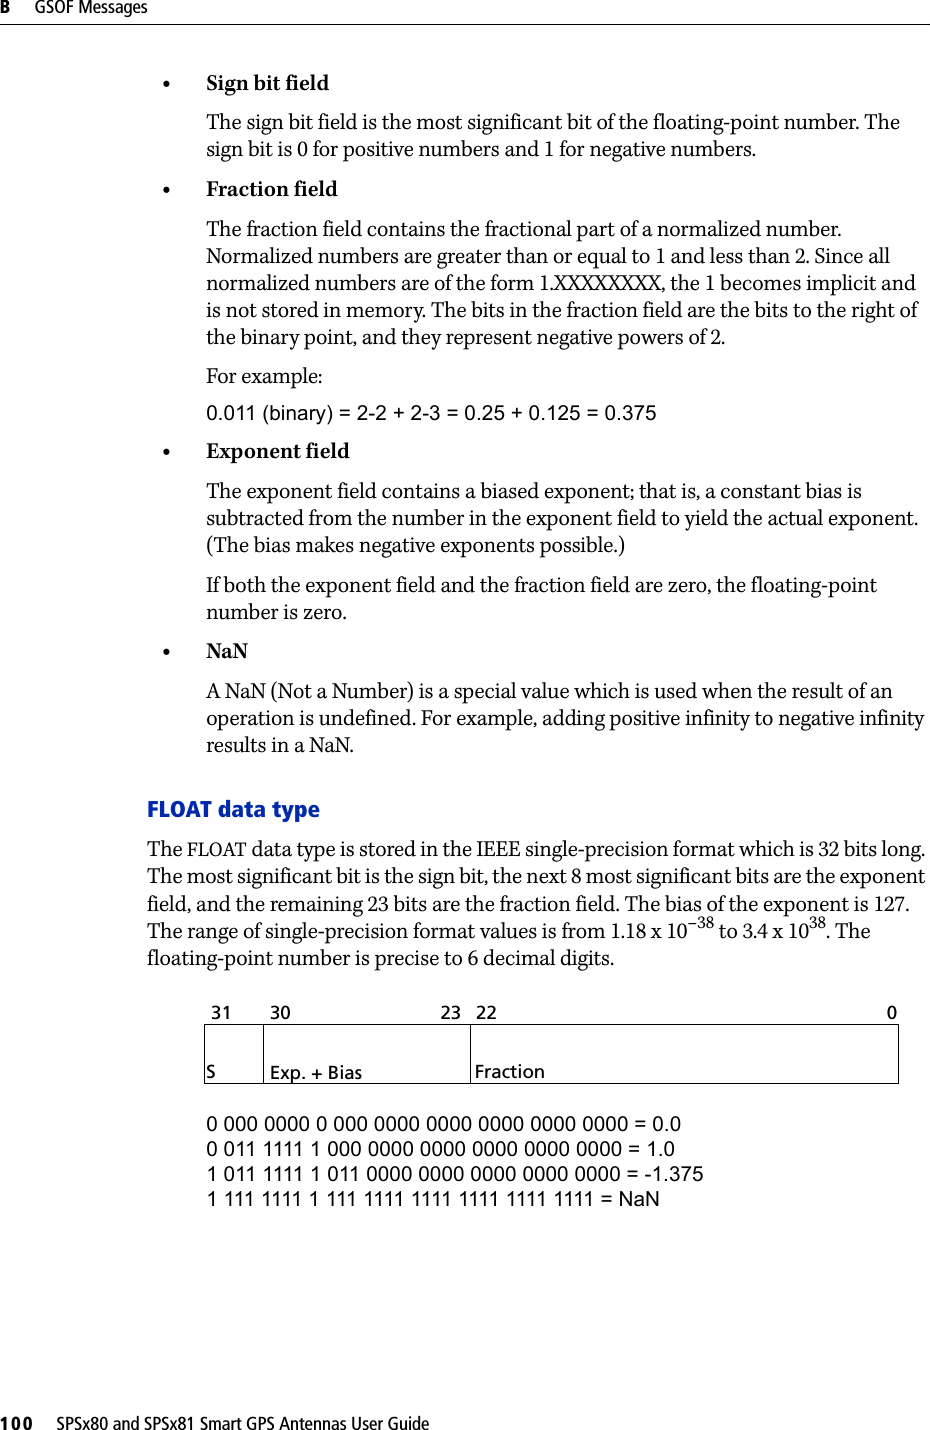 B     GSOF Messages100     SPSx80 and SPSx81 Smart GPS Antennas User Guide•Sign bit fieldThe sign bit field is the most significant bit of the floating-point number. The sign bit is 0 for positive numbers and 1 for negative numbers.•Fraction fieldThe fraction field contains the fractional part of a normalized number. Normalized numbers are greater than or equal to 1 and less than 2. Since all normalized numbers are of the form 1.XXXXXXXX, the 1 becomes implicit and is not stored in memory. The bits in the fraction field are the bits to the right of the binary point, and they represent negative powers of 2. For example:0.011 (binary) = 2-2 + 2-3 = 0.25 + 0.125 = 0.375•Exponent fieldThe exponent field contains a biased exponent; that is, a constant bias is subtracted from the number in the exponent field to yield the actual exponent. (The bias makes negative exponents possible.)If both the exponent field and the fraction field are zero, the floating-point number is zero.•NaNA NaN (Not a Number) is a special value which is used when the result of an operation is undefined. For example, adding positive infinity to negative infinity results in a NaN.FLOAT data typeThe FLOAT data type is stored in the IEEE single-precision format which is 32 bits long. The most significant bit is the sign bit, the next 8 most significant bits are the exponent field, and the remaining 23 bits are the fraction field. The bias of the exponent is 127. The range of single-precision format values is from 1.18 x 10–38 to 3.4 x 1038. The floating-point number is precise to 6 decimal digits.0 000 0000 0 000 0000 0000 0000 0000 0000 = 0.0 0 011 1111 1 000 0000 0000 0000 0000 0000 = 1.0 1 011 1111 1 011 0000 0000 0000 0000 0000 = -1.375 1 111 1111 1 111 1111 1111 1111 1111 1111 = NaNSExp. + Bias Fraction31 30 23  22 0